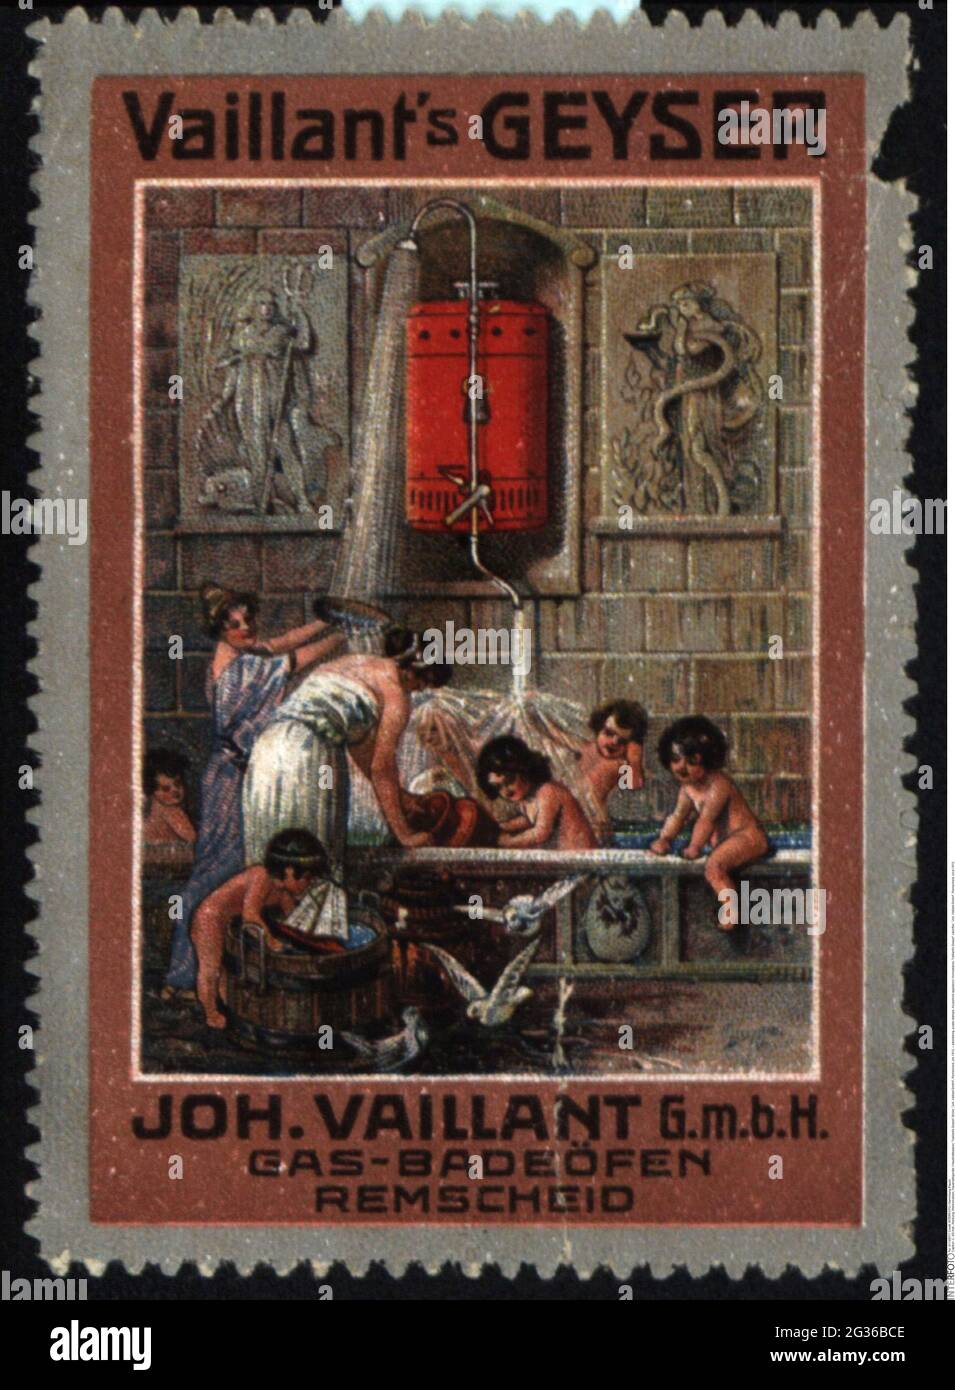 advertising, poster stamps, household appliance / homewares, 'Vaillant's Geyser' calorifier, ADDITIONAL-RIGHTS-CLEARANCE-INFO-NOT-AVAILABLE Stock Photo